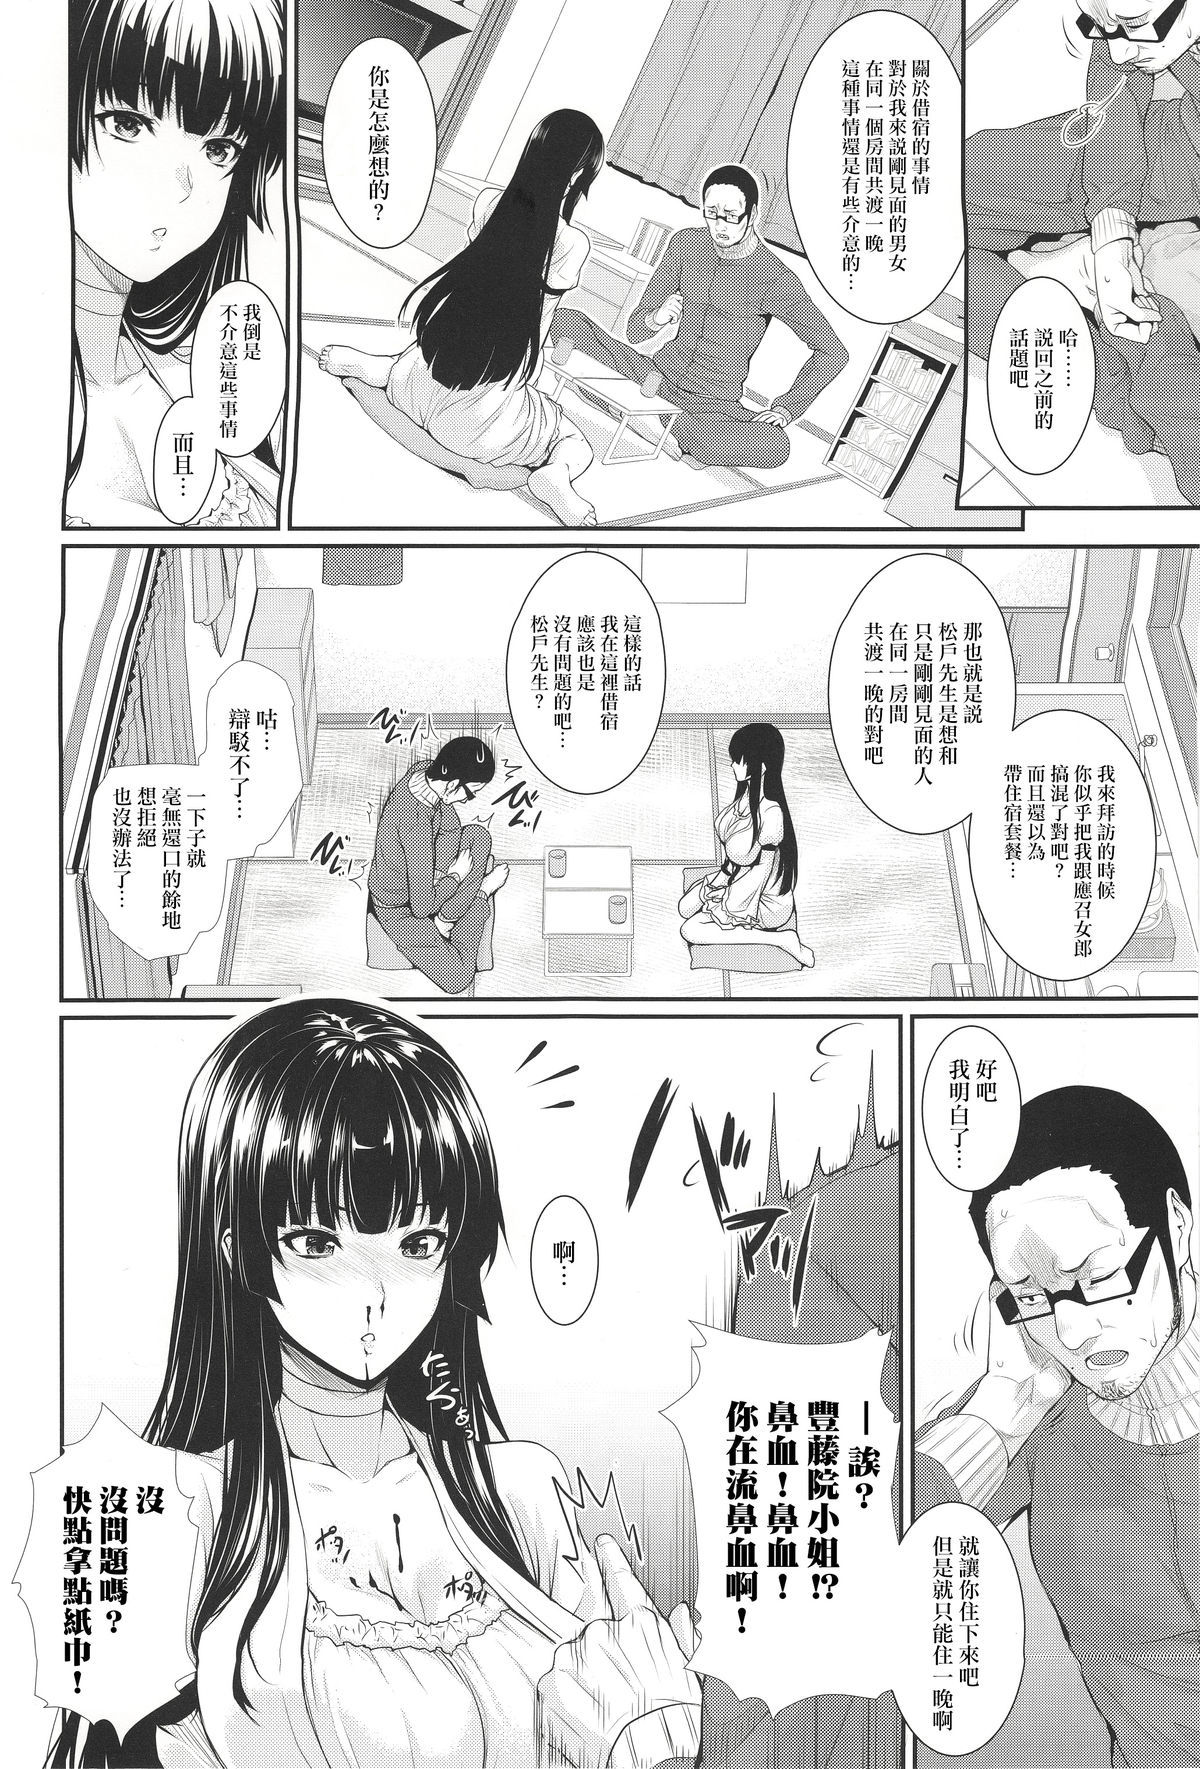 (C89) [Z.A.P. (Zucchini)] Yojouhan Monogatari [Chinese] [無毒漢化組] page 6 full